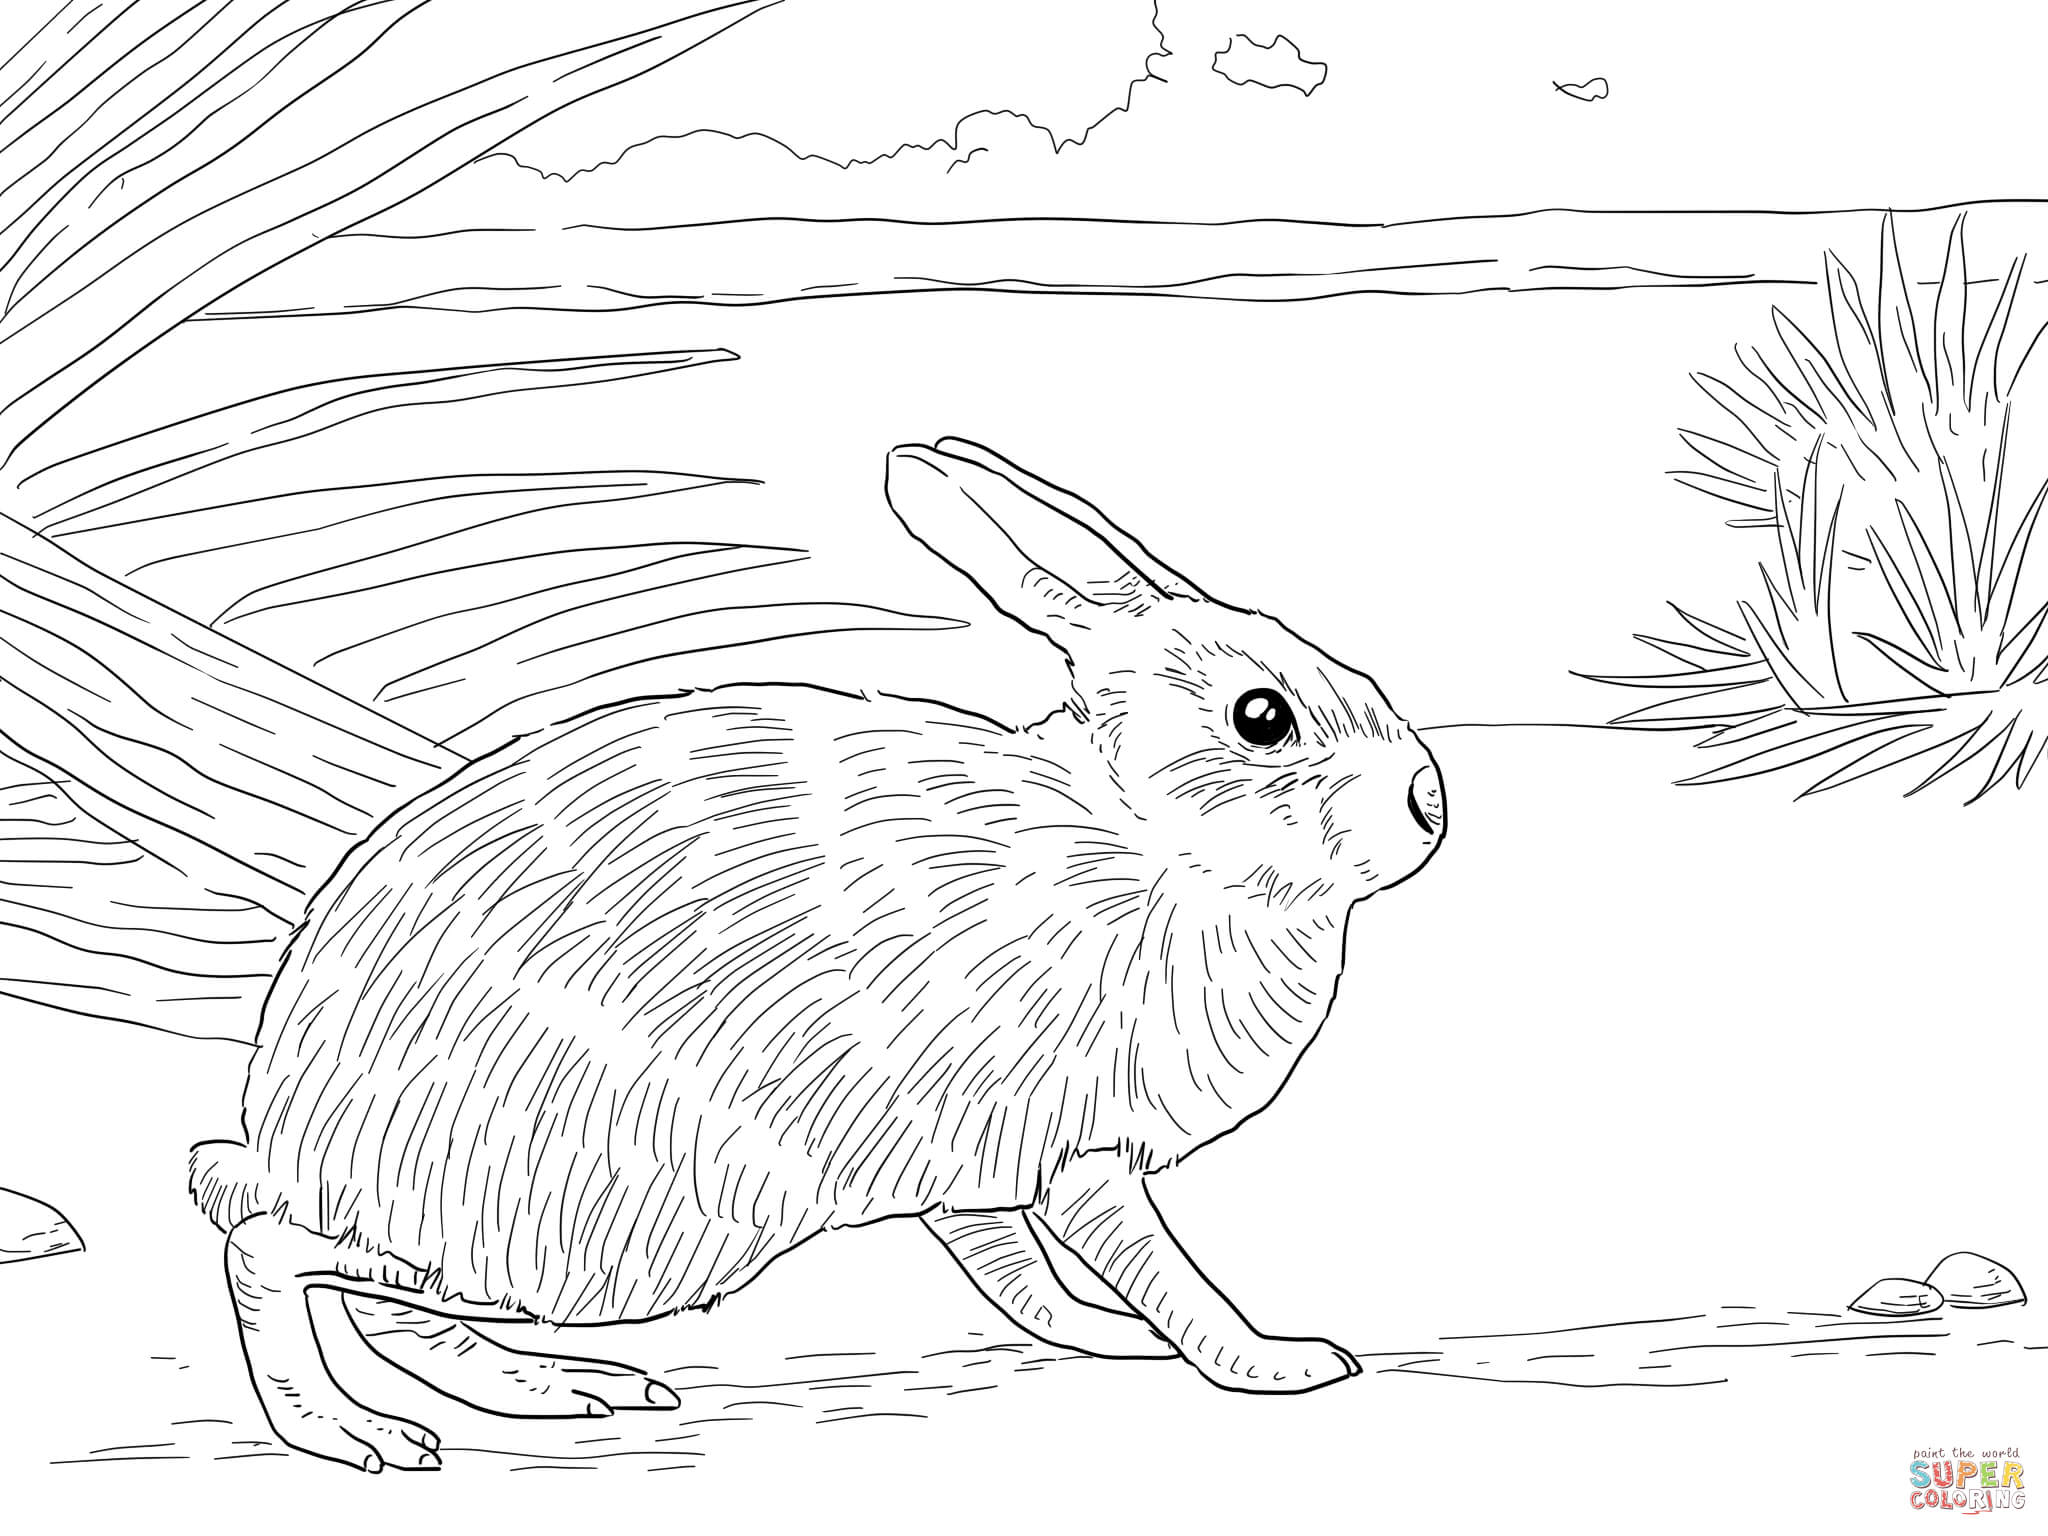 Rabbit Coloring Pages For Adults at GetDrawings | Free ...